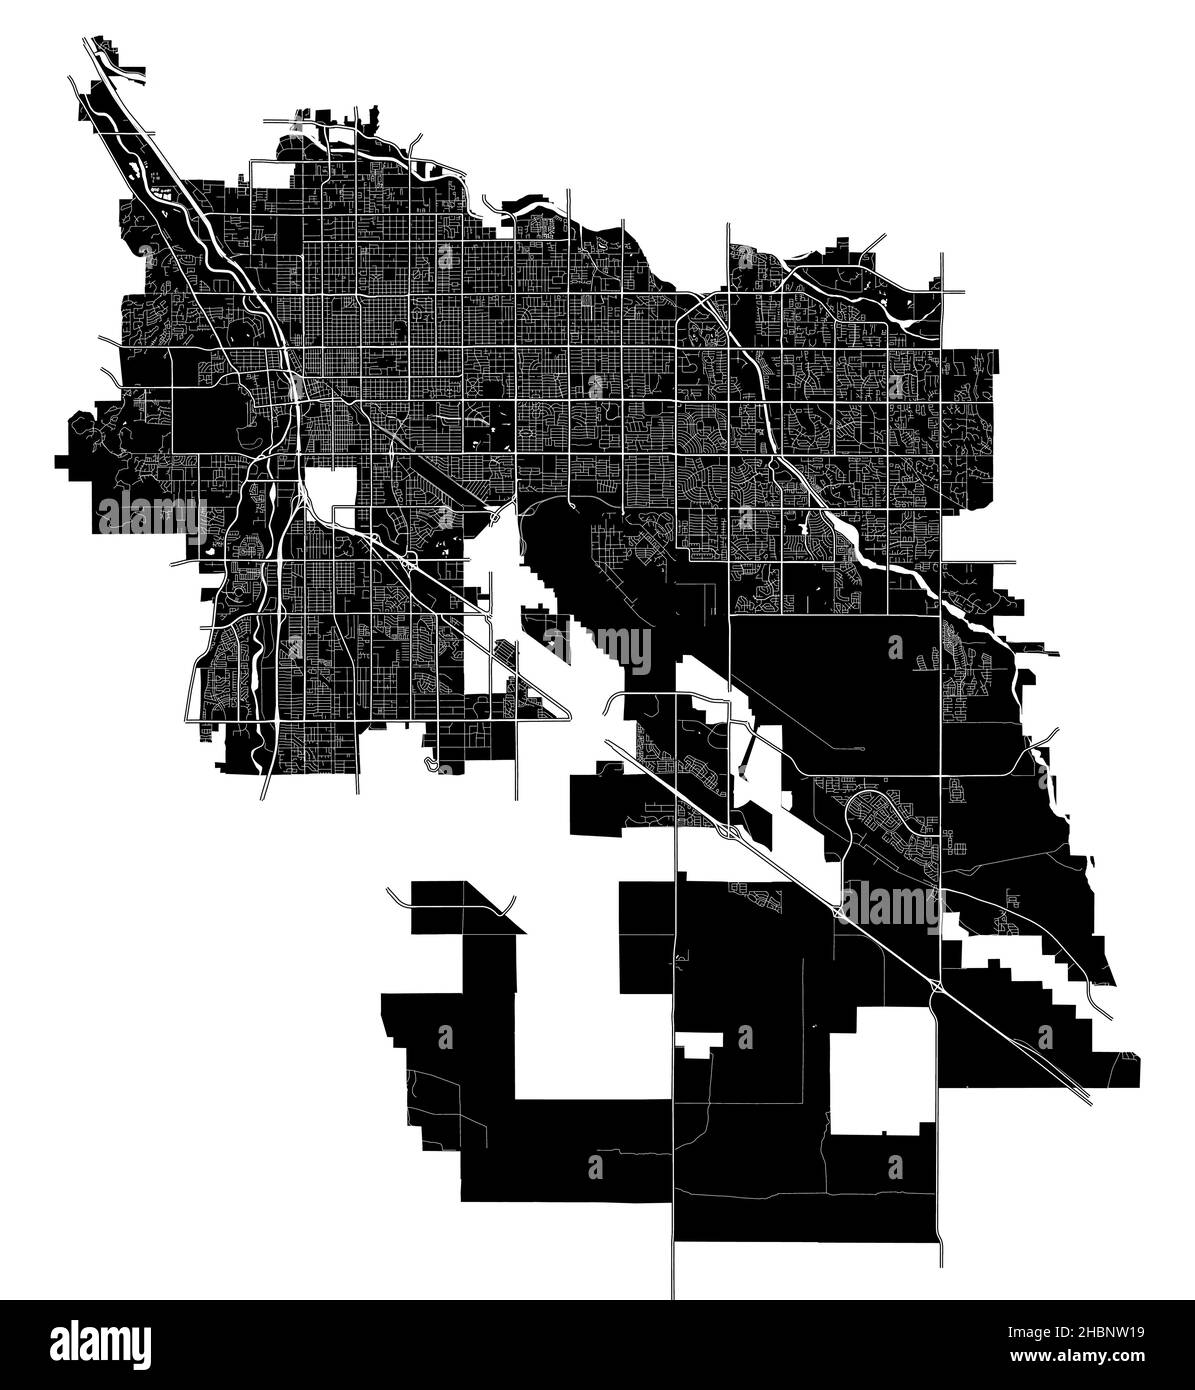 Tucson, Arizona, United States, high resolution vector map with city boundaries, and editable paths. The city map was drawn with white areas and lines Stock Vector